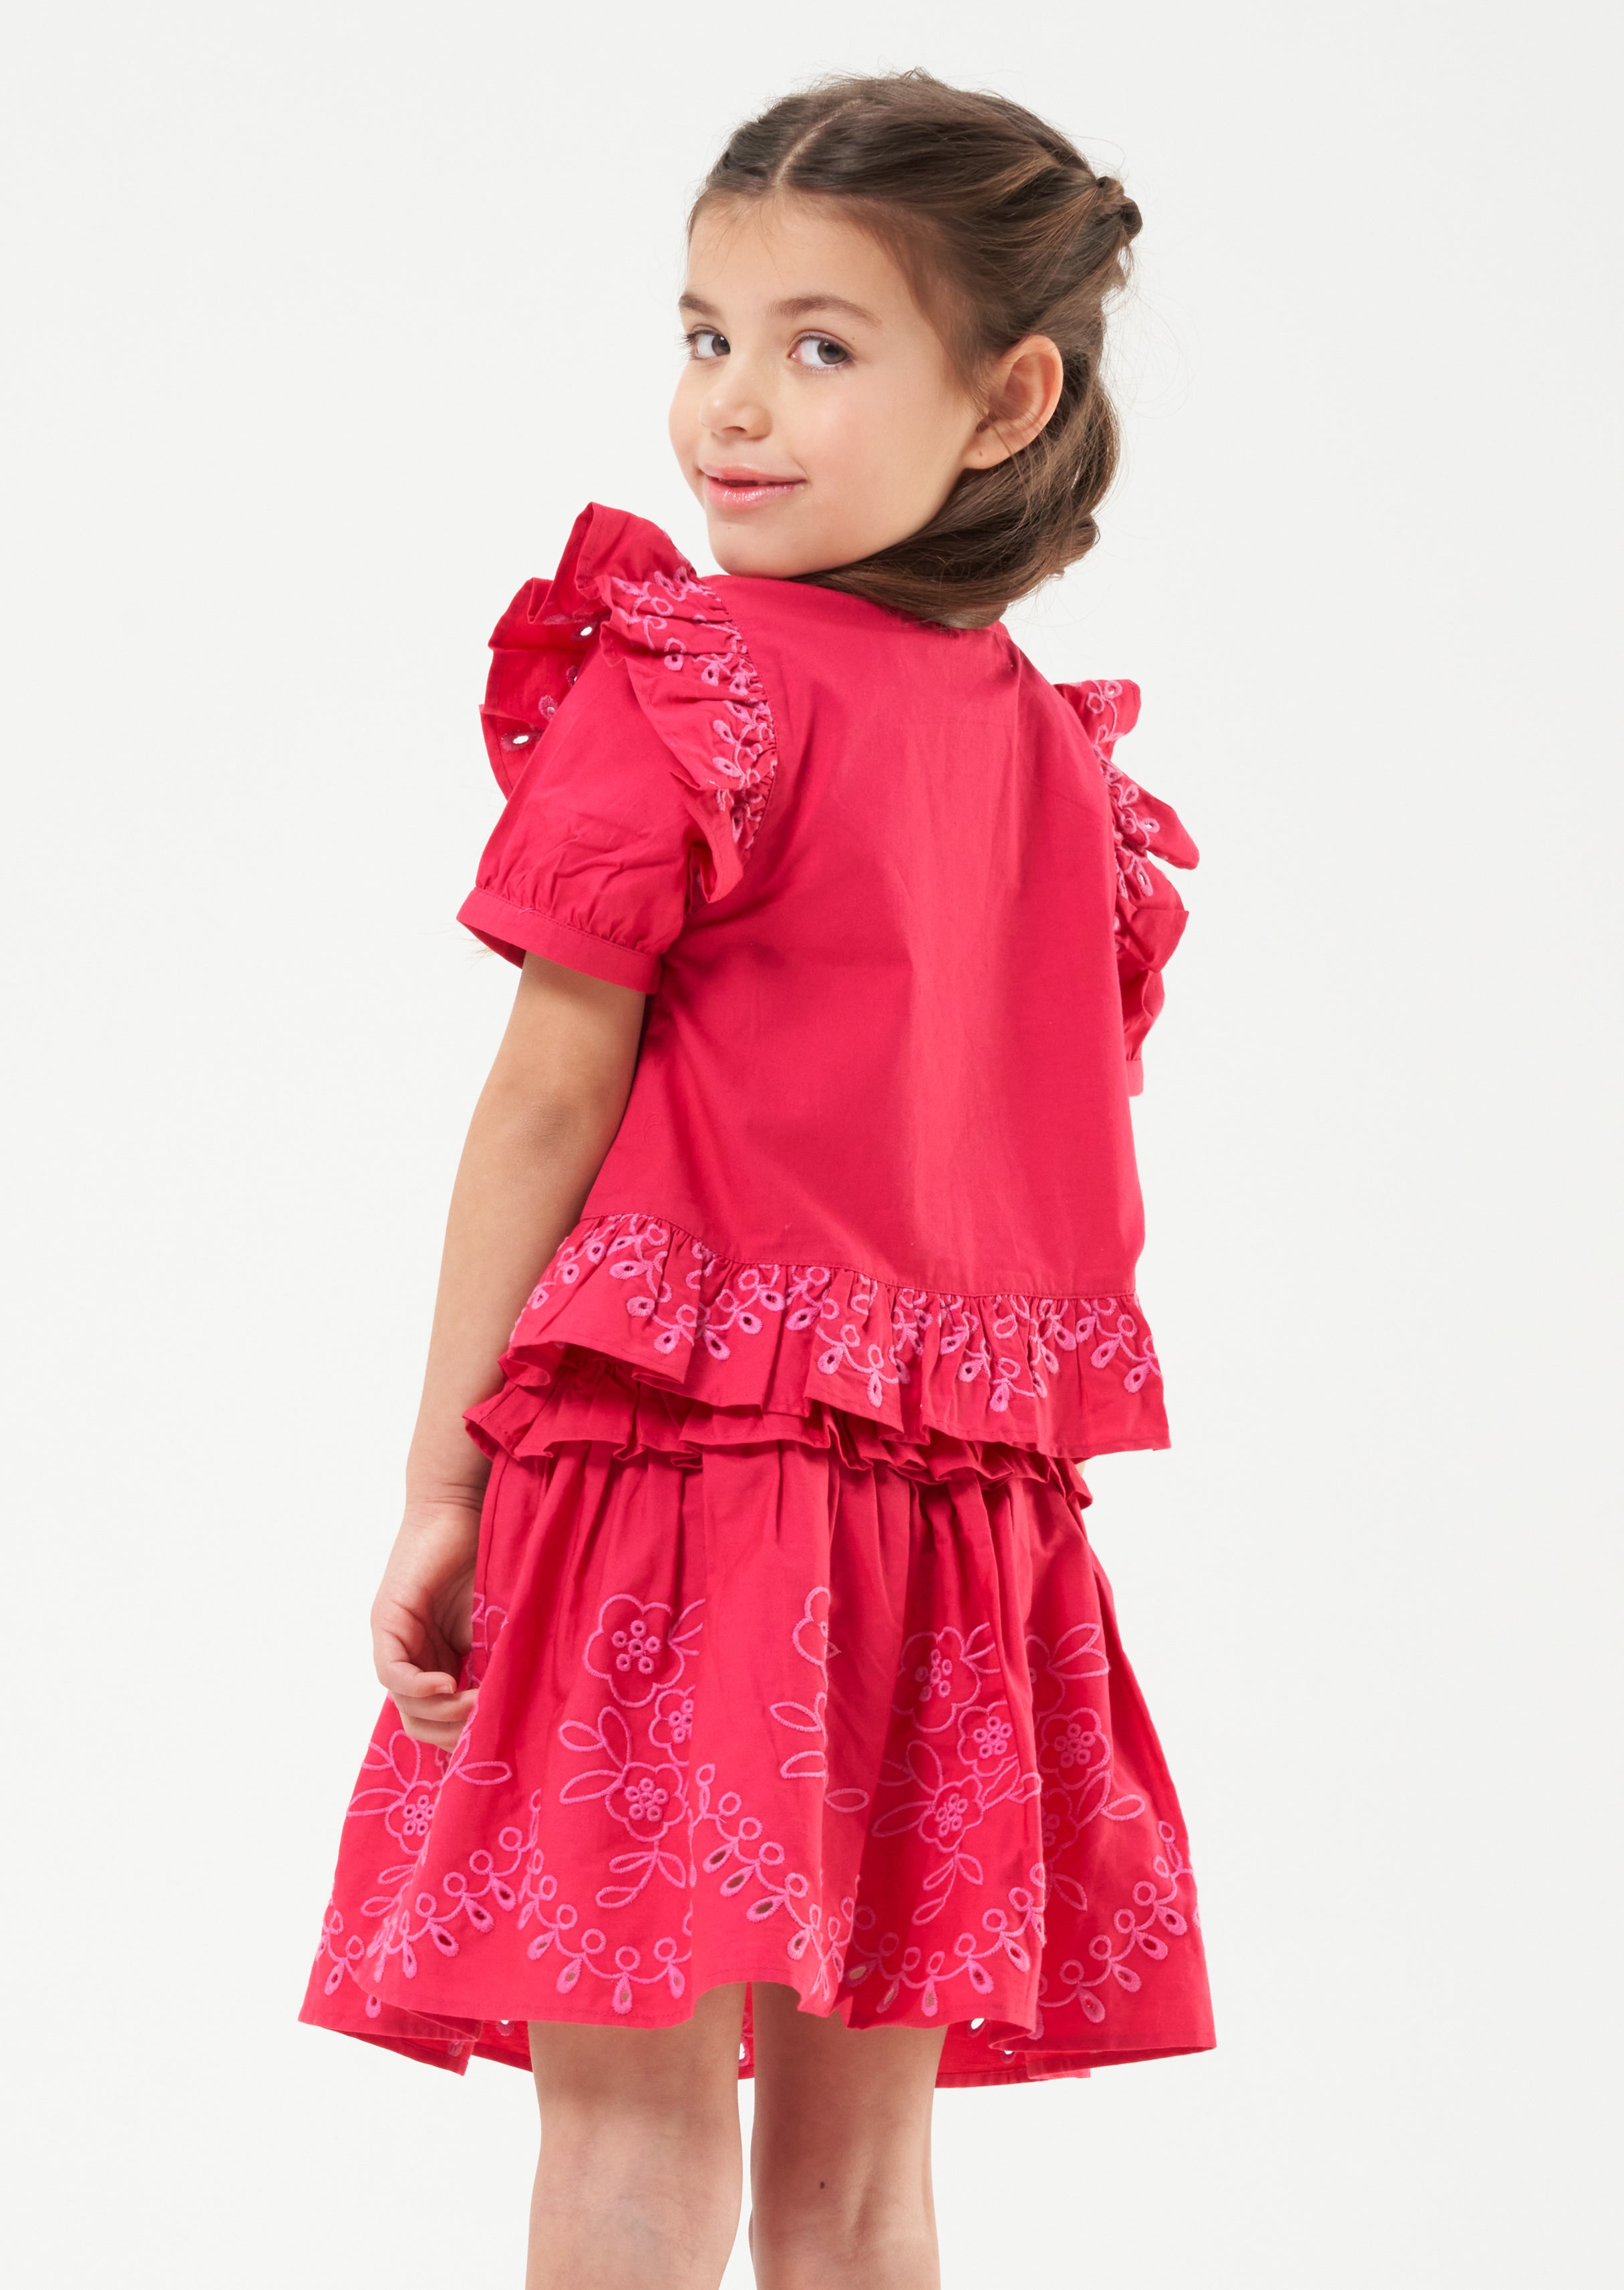 Girls Floral Embroidered Pink Skirt